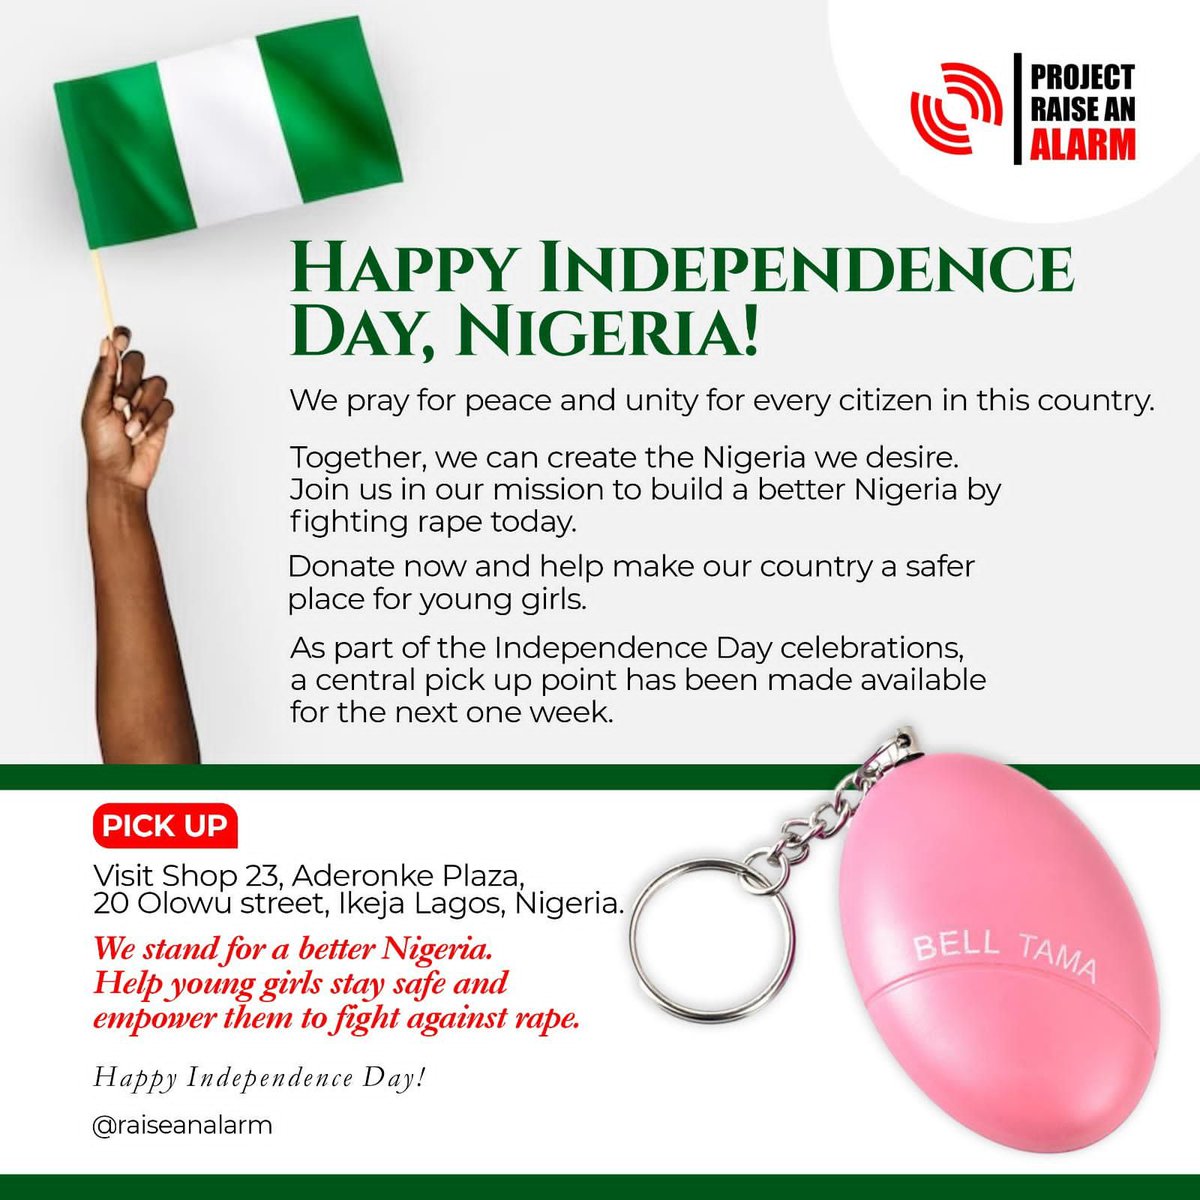 As part of the independence day celebrations, antirape alarms have been made available for YOU for the next one week.

For pick up, visit SHOP 24, ADERONKE PLAZA, 20 OLOWU STREET, IKEJA, LAGOS, NIGERIA.

A safe nation, is a happy nation.

God bless NIGERIA!
Stay SAFE ALWAYS!